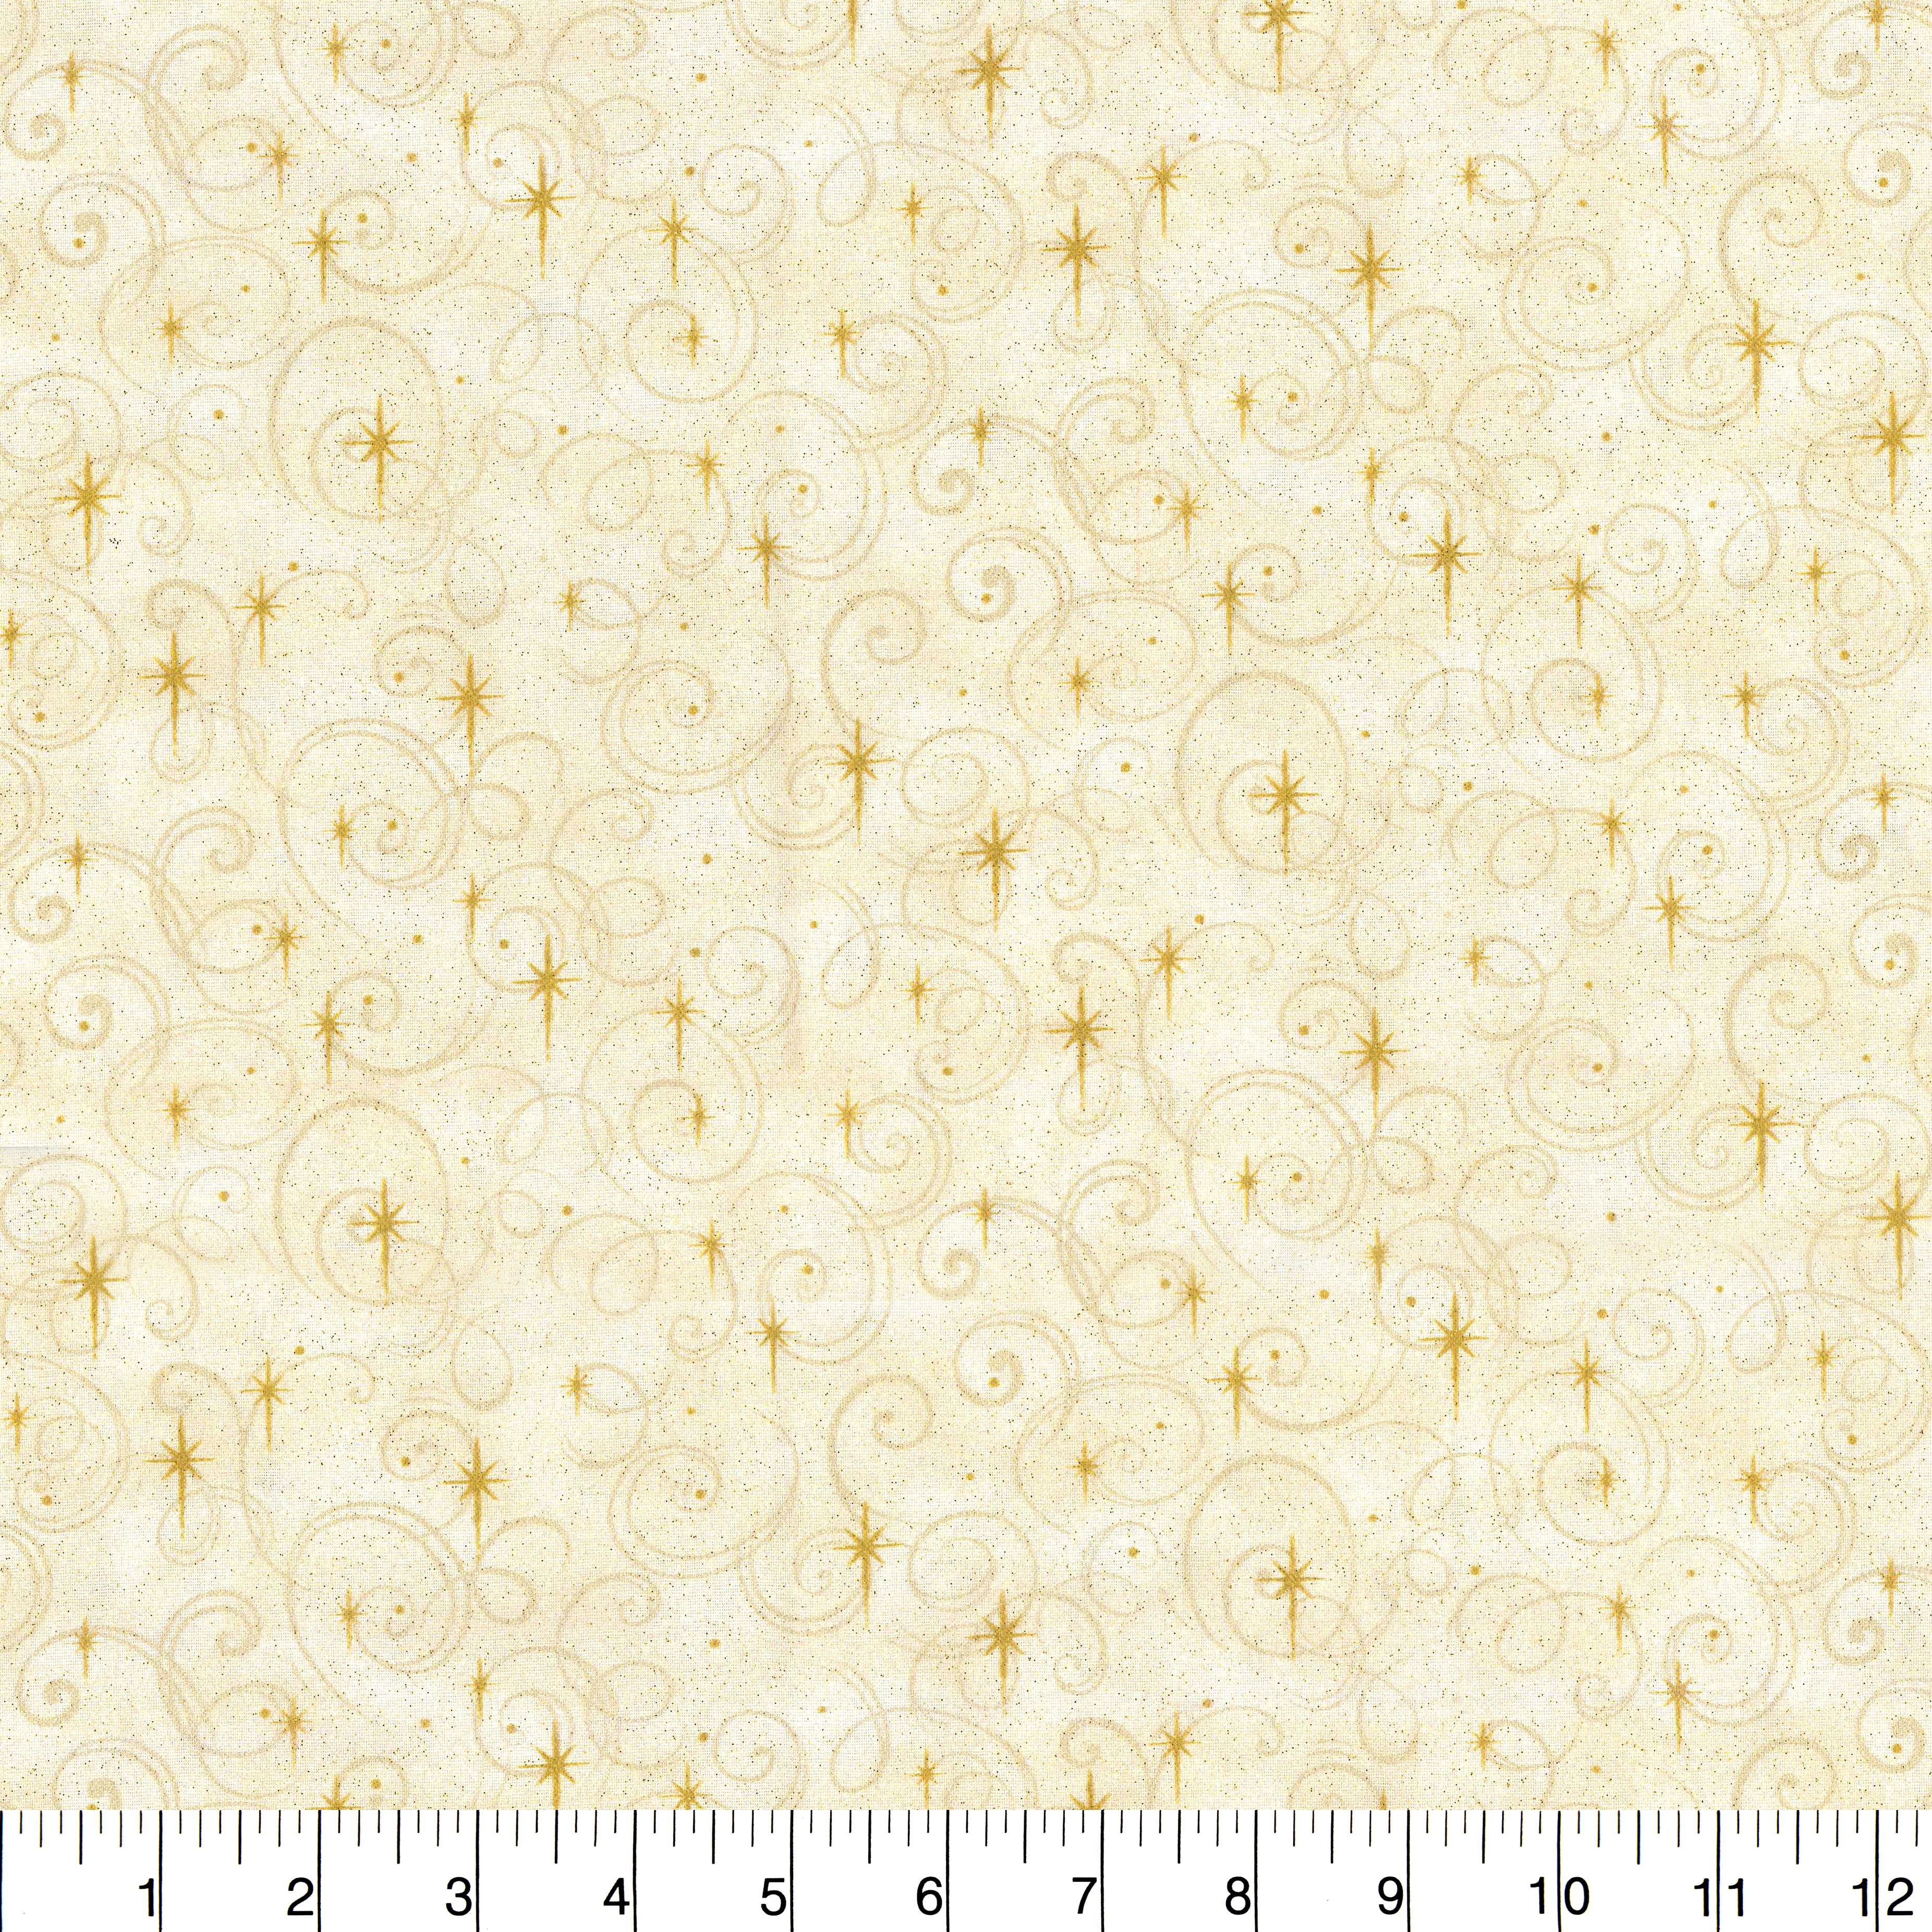 Fabric Traditions Gold Stars Cotton Fabric